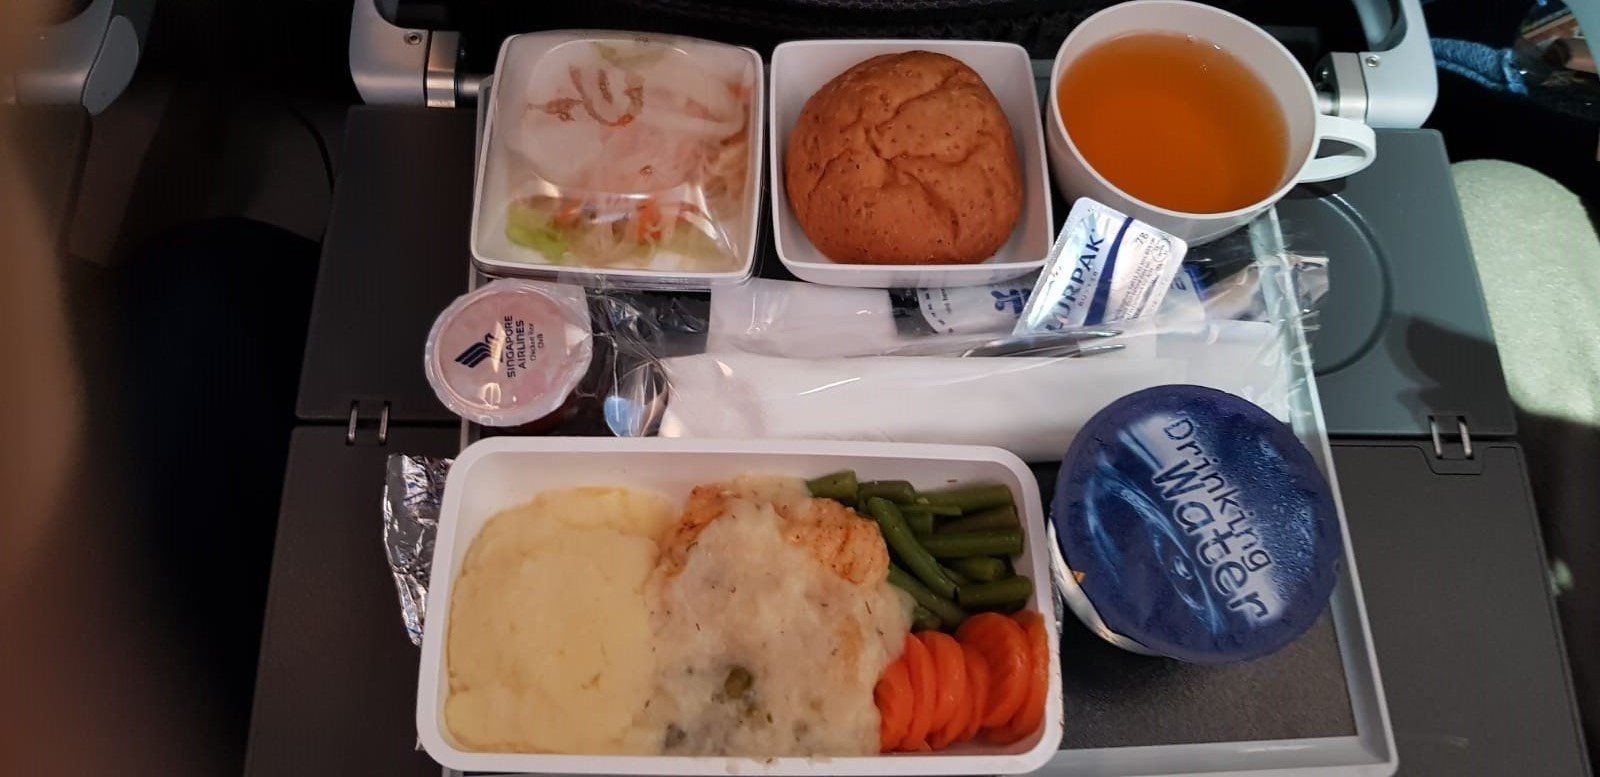 tray of airplane food posted by disappointed passenger flying first class